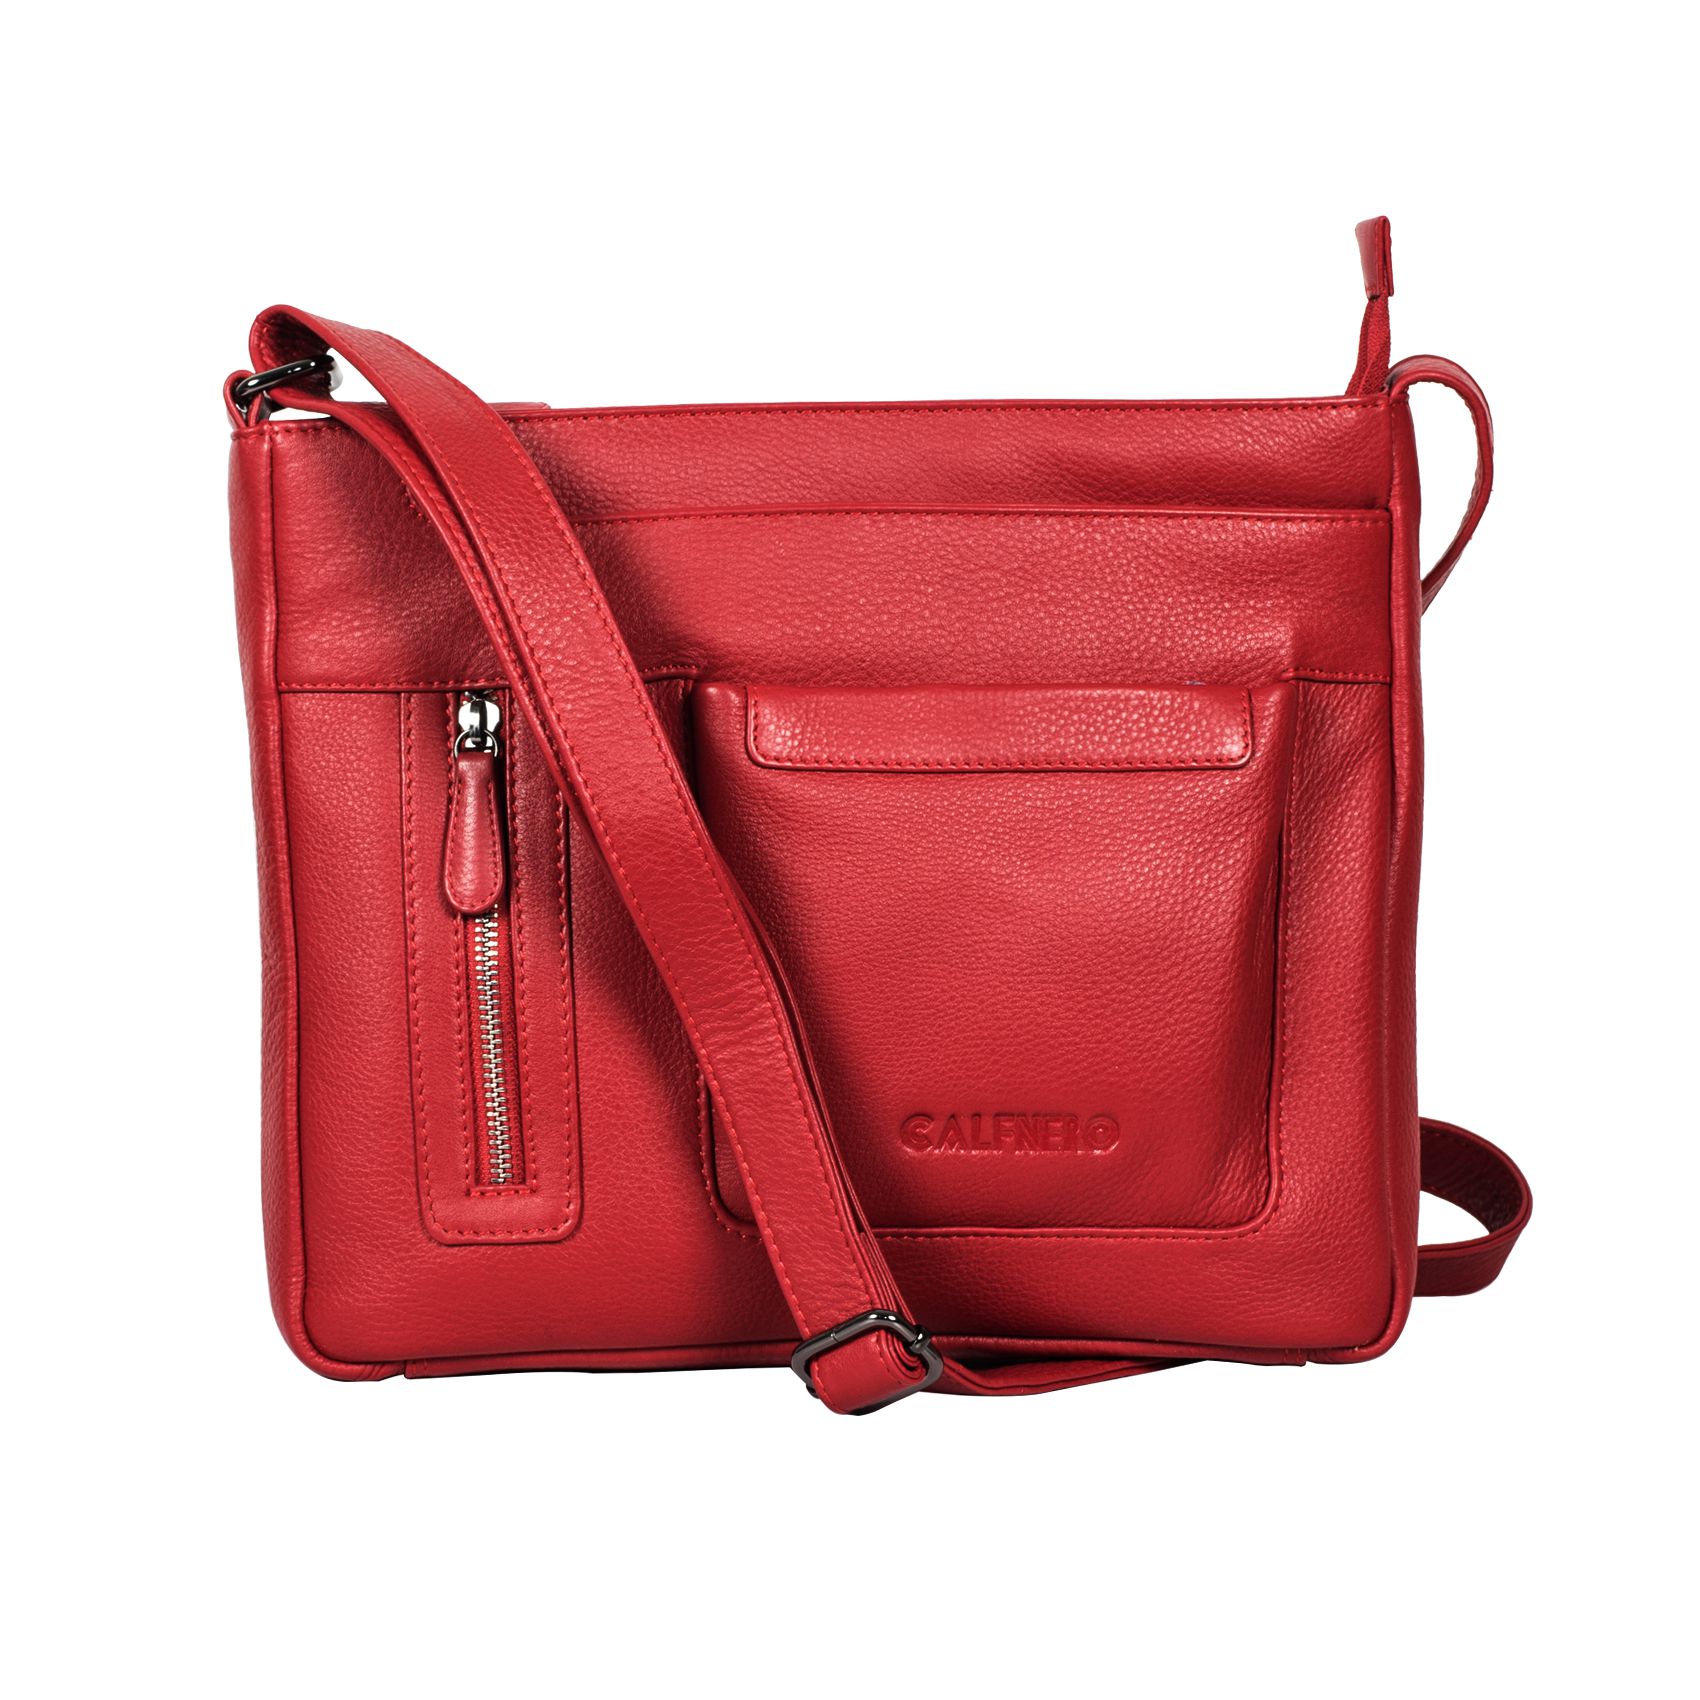 Calfnero Red Pure Leather Sling Bag - Buy Calfnero Red Pure Leather Sling Bag Online at Best ...